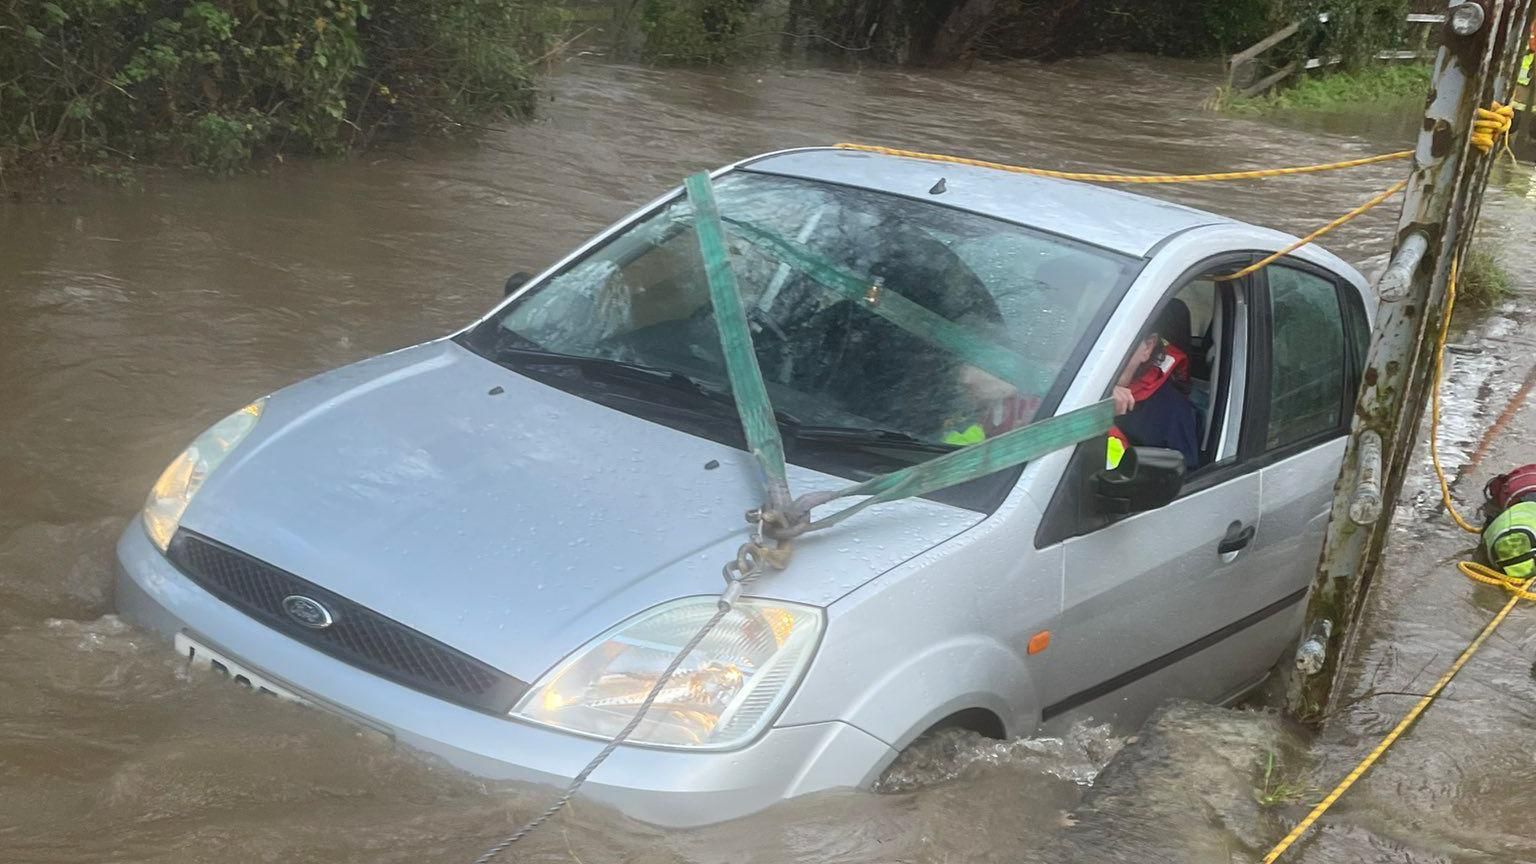 The car being winched from the flood-water